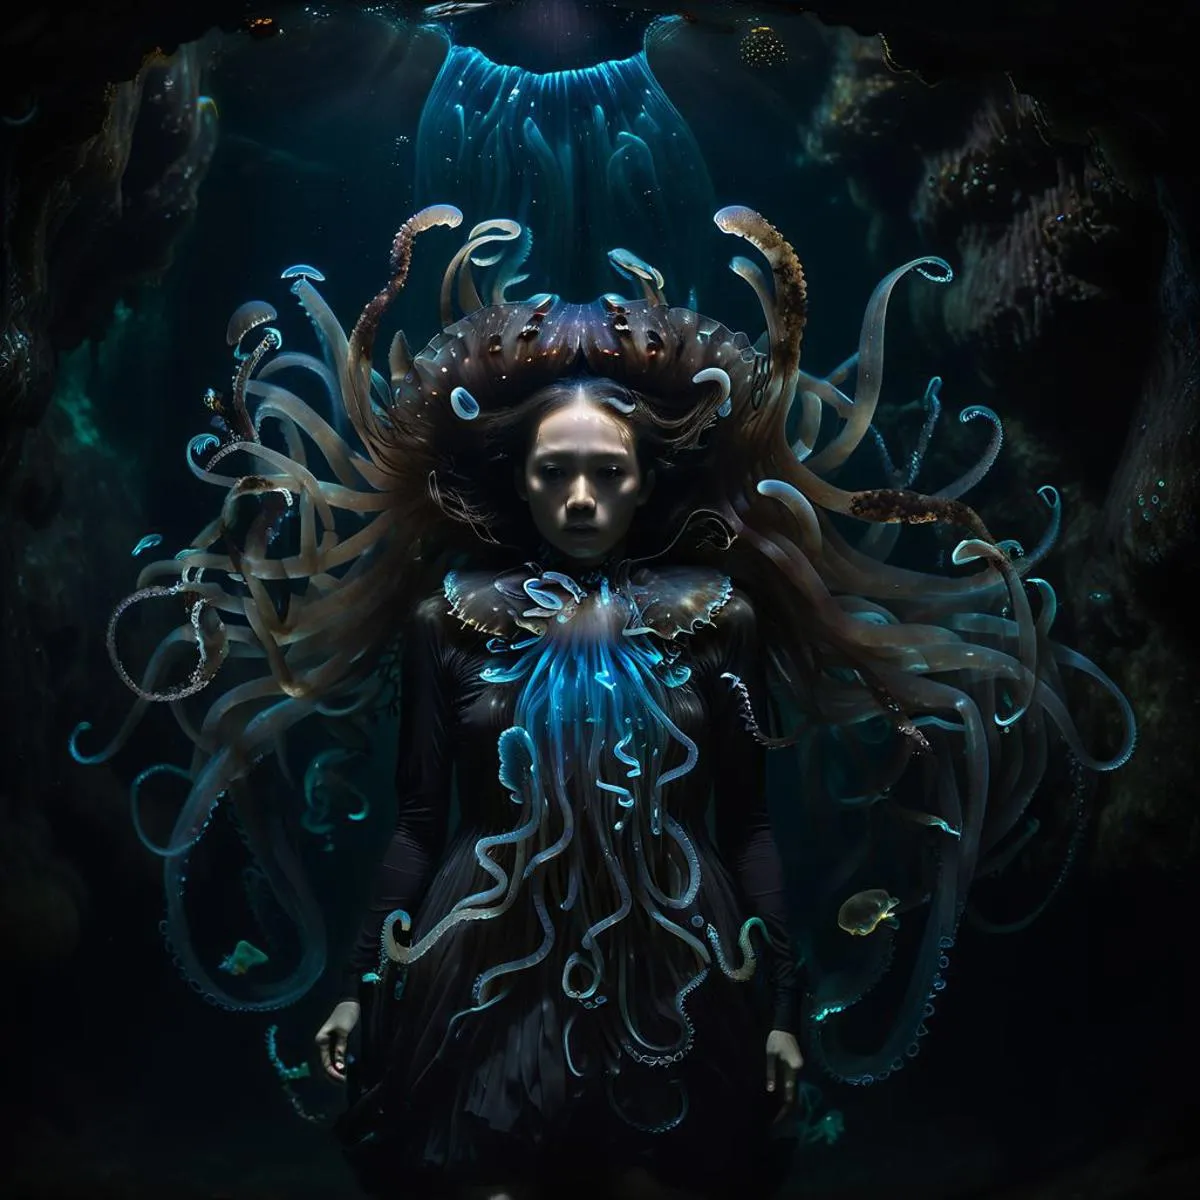 A fantasy art depiction of an underwater goddess with flowing hair and glowing tentacles, AI generated using Stable Diffusion.